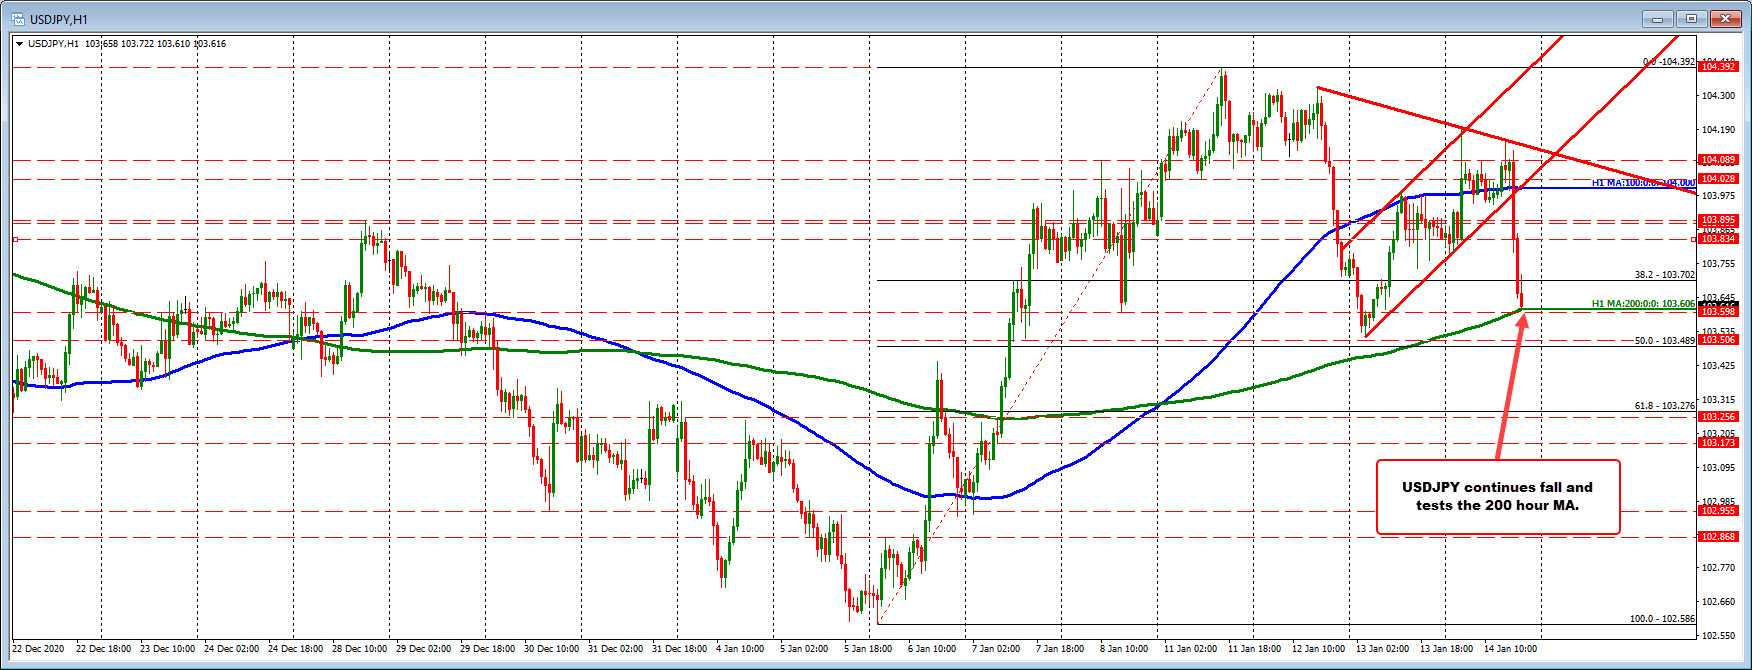 Selling continues for the USDJPY